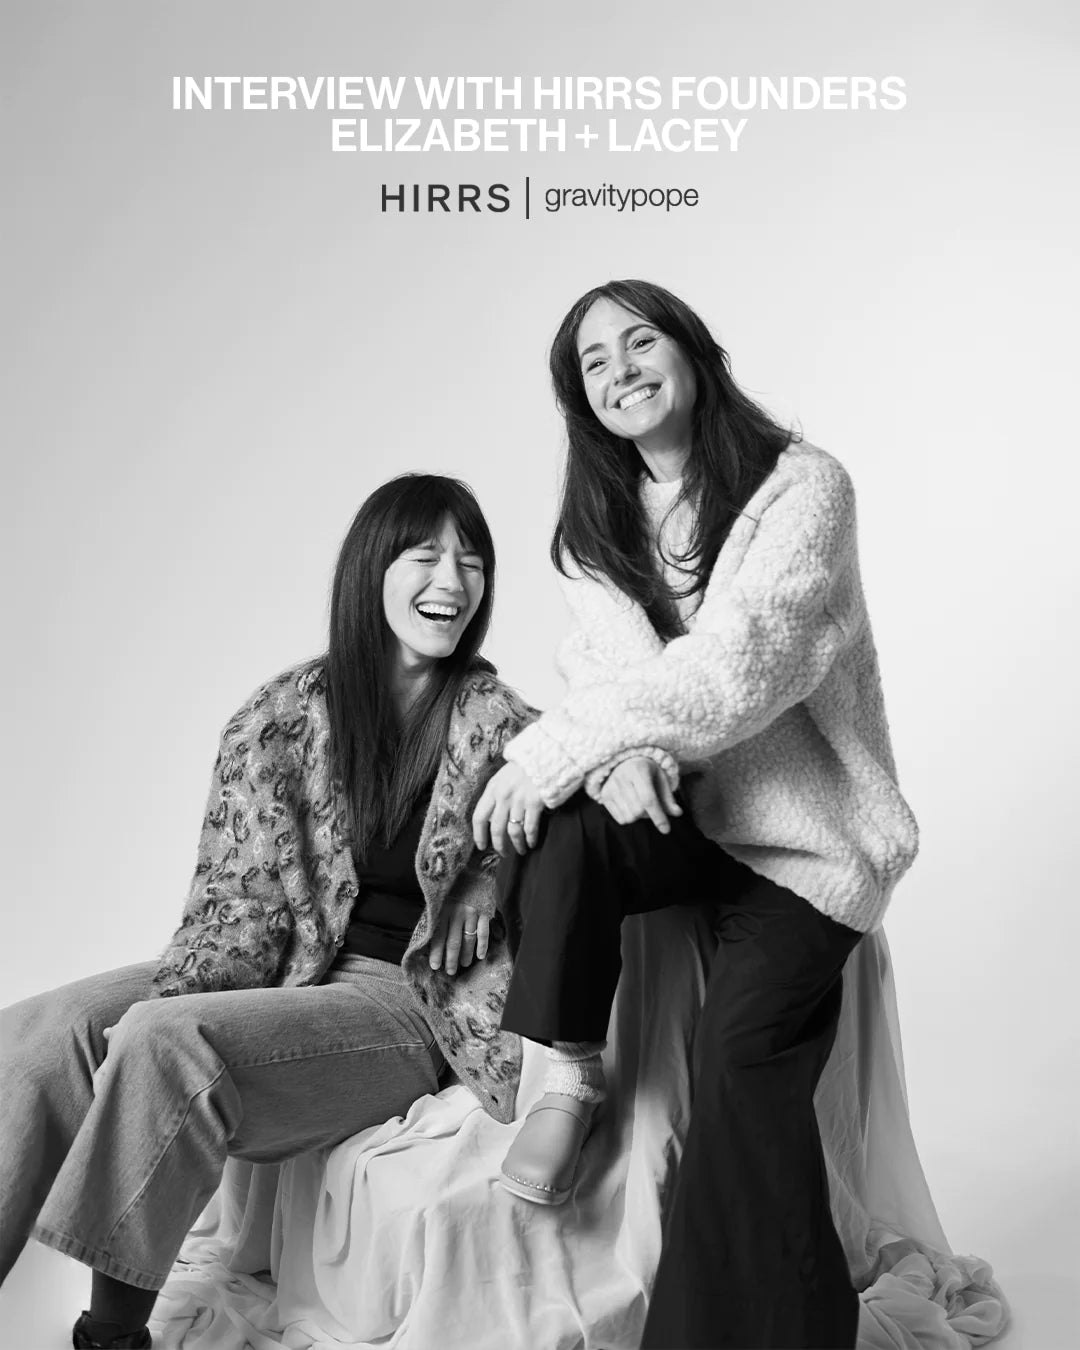 Interview with HIRRS Founders Elizabeth and Lacey